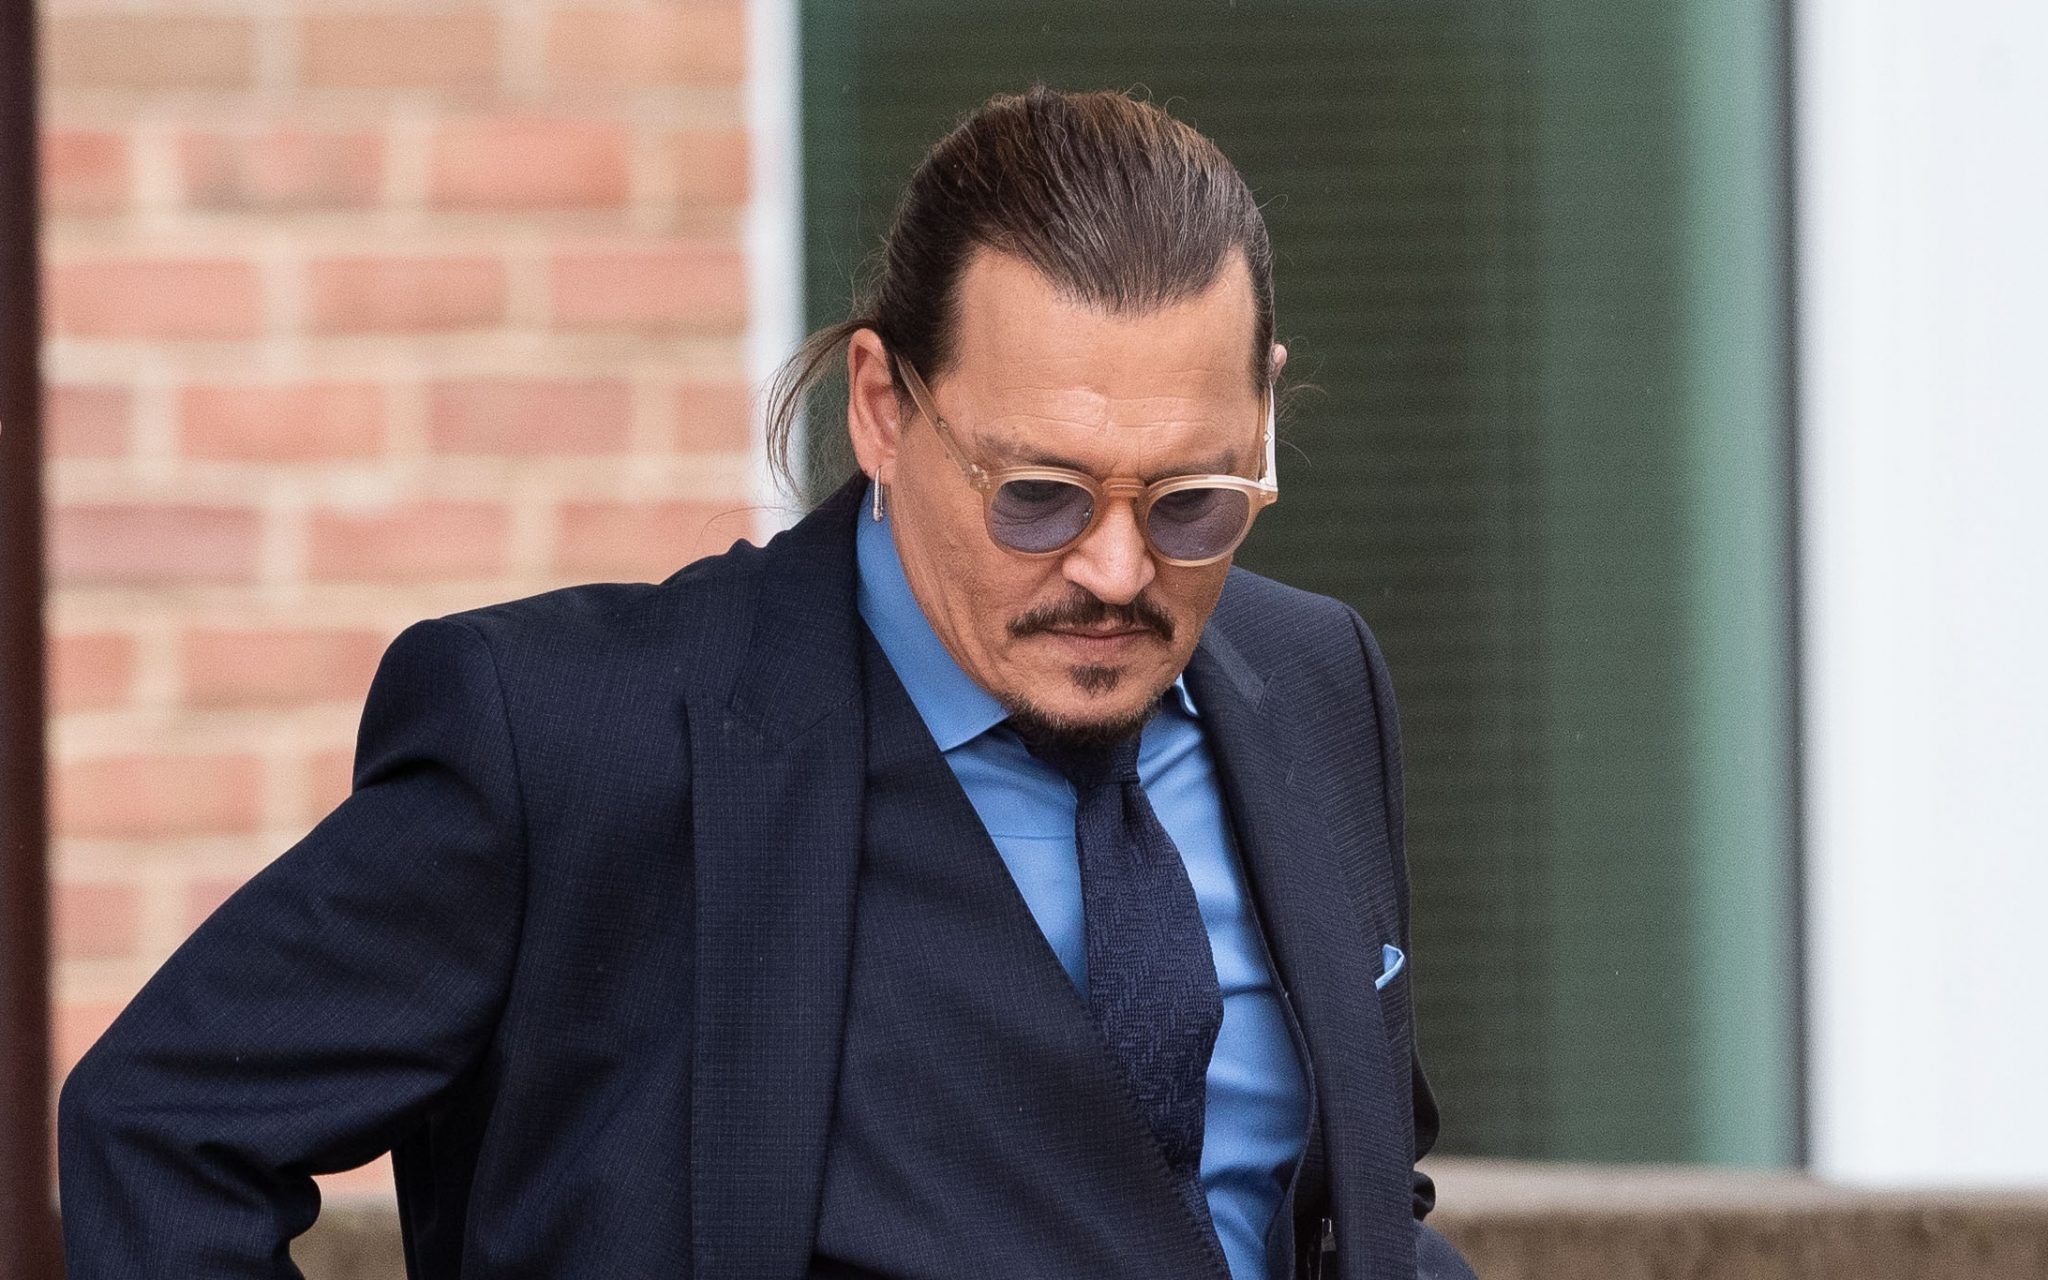 Johnny Depp asks judge to strike 'inappropriate argument' from Heard closing statement